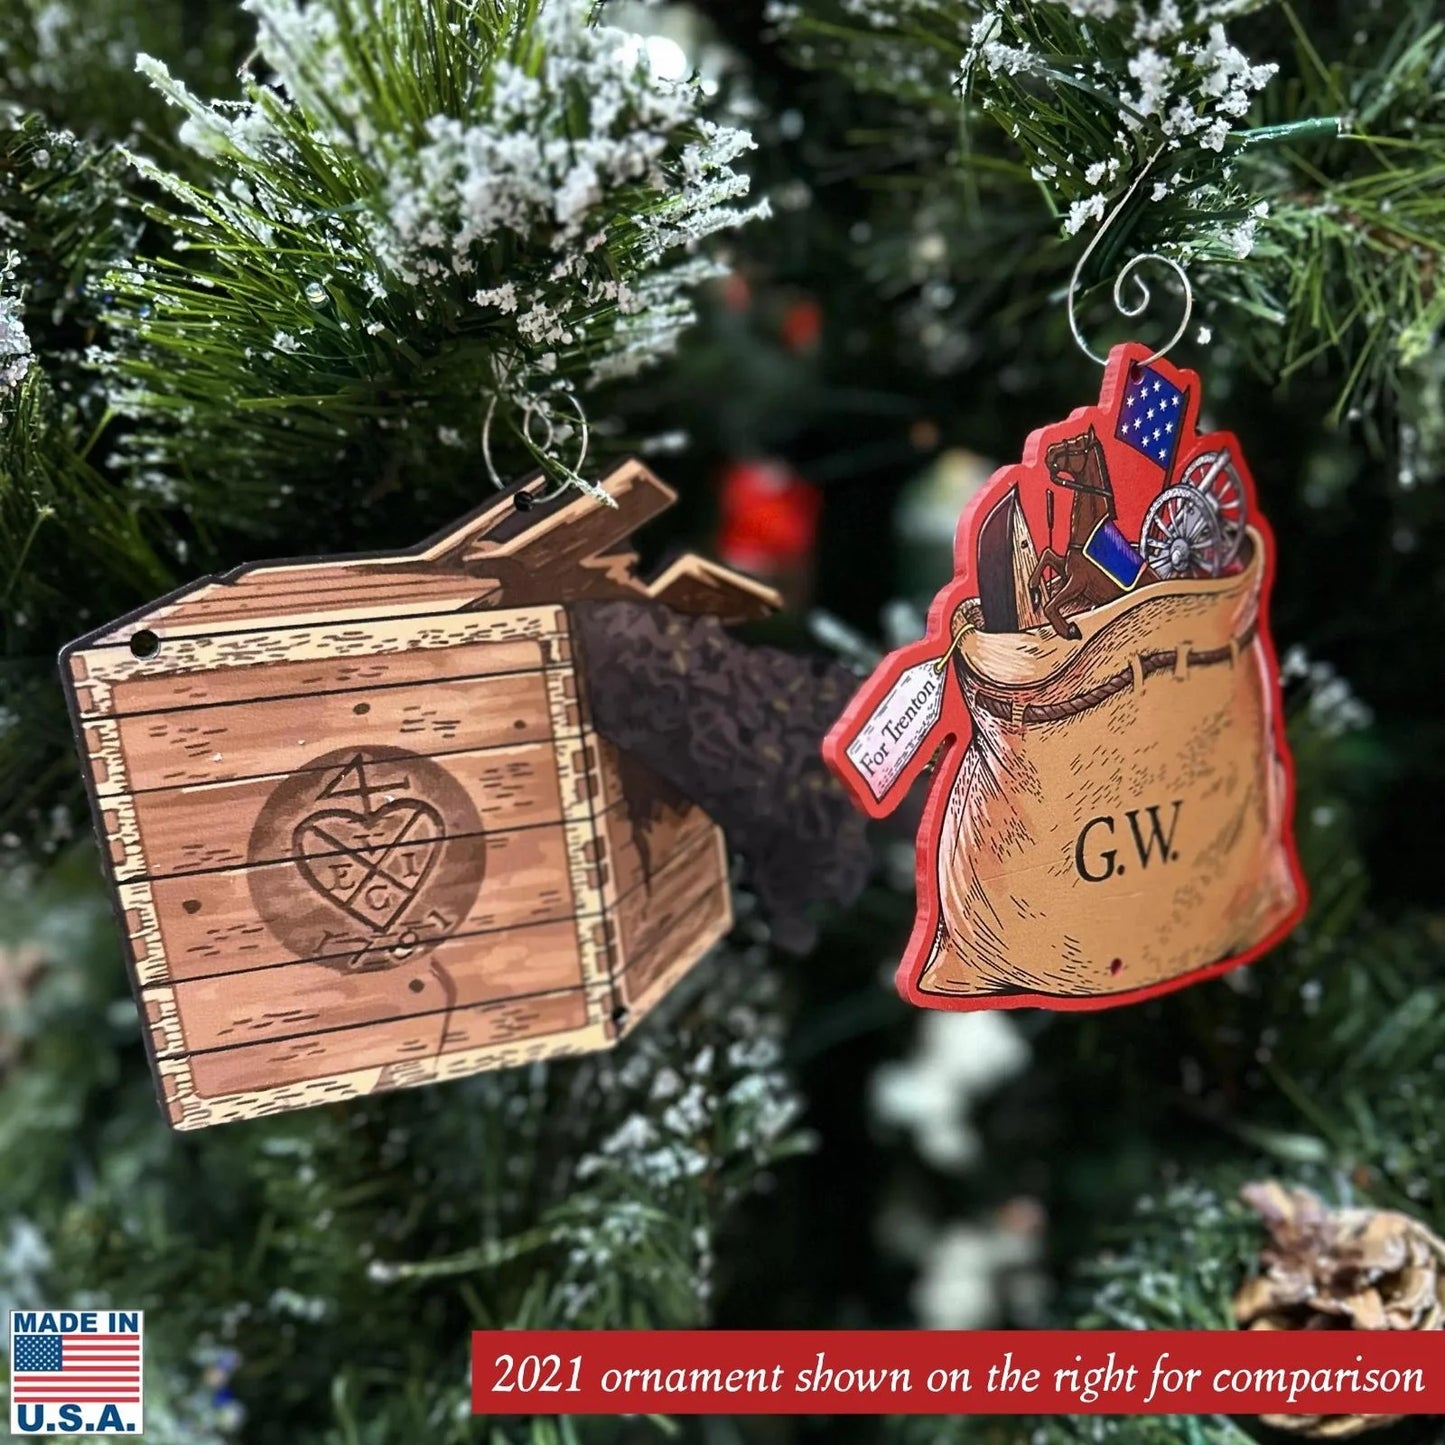 Comparison of Boston Tea Party and George Washington Christmas Crossing ornaments from The History List store